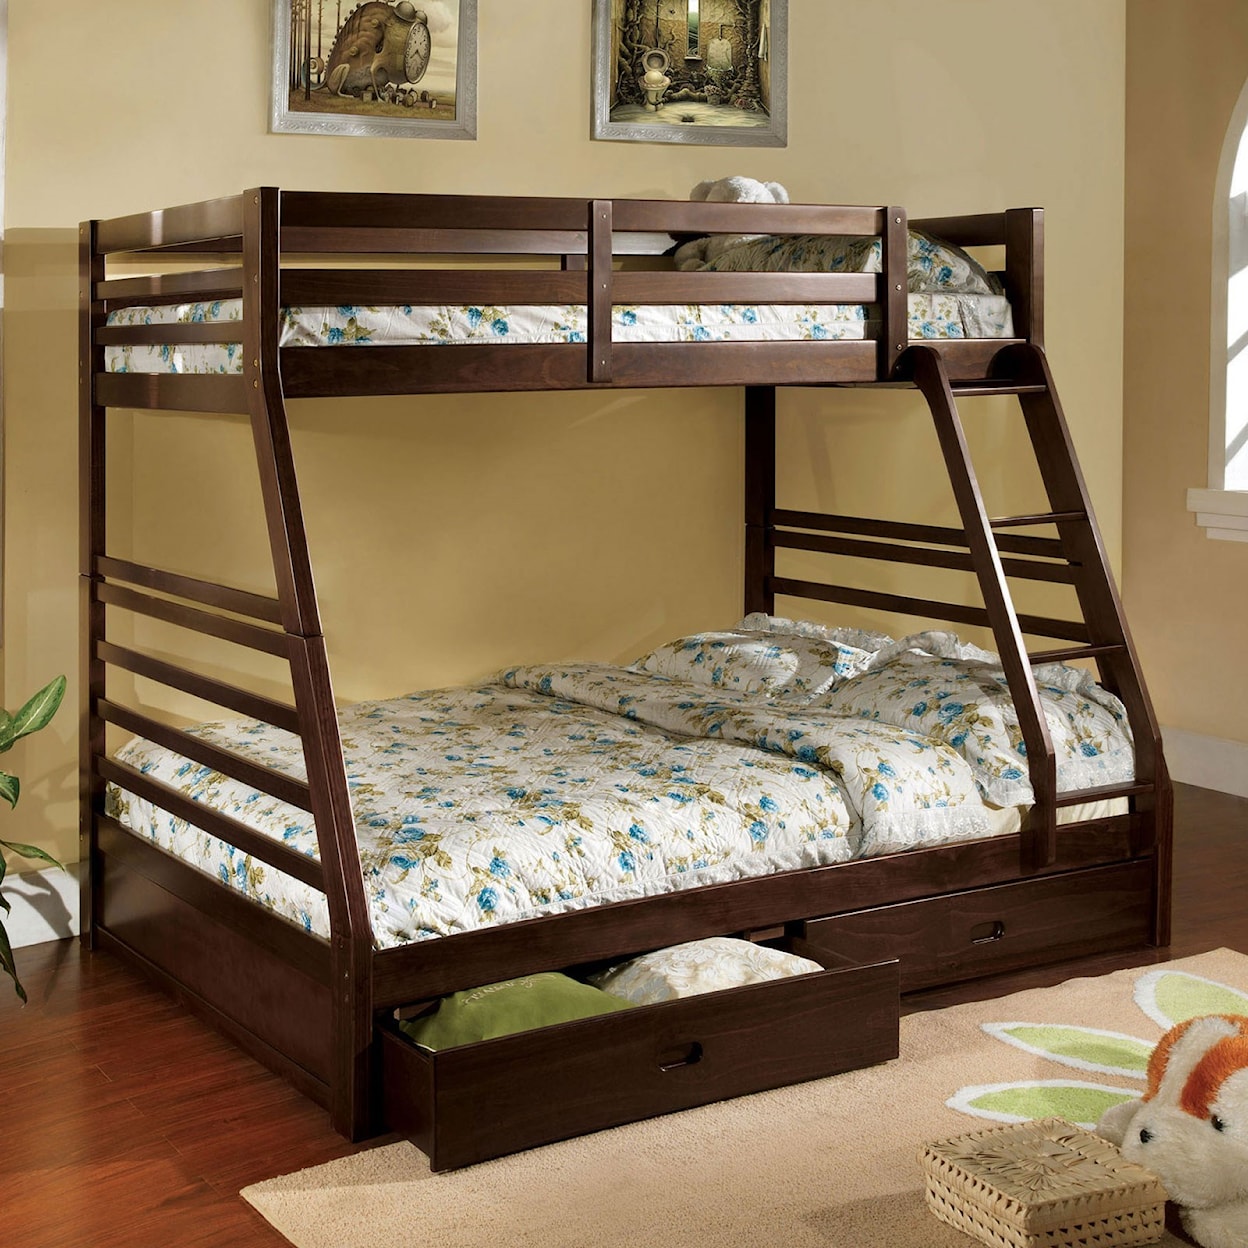 FUSA California III Twin-over-Full Bunk Bed with 2 Drawers